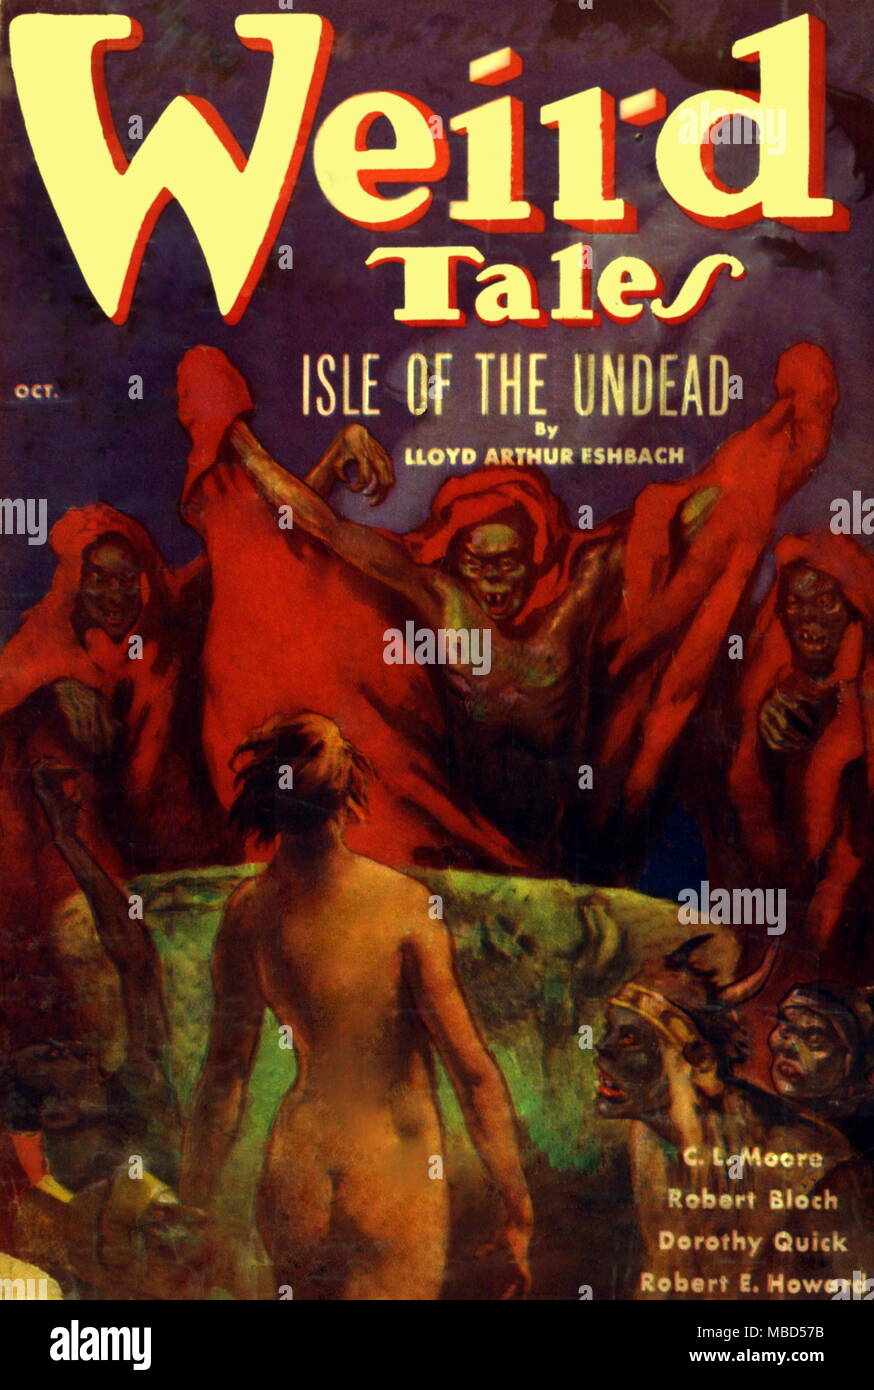 Science Fiction and Horror Magazine. Cover of Weird Tales, October 1936. Stock Photo